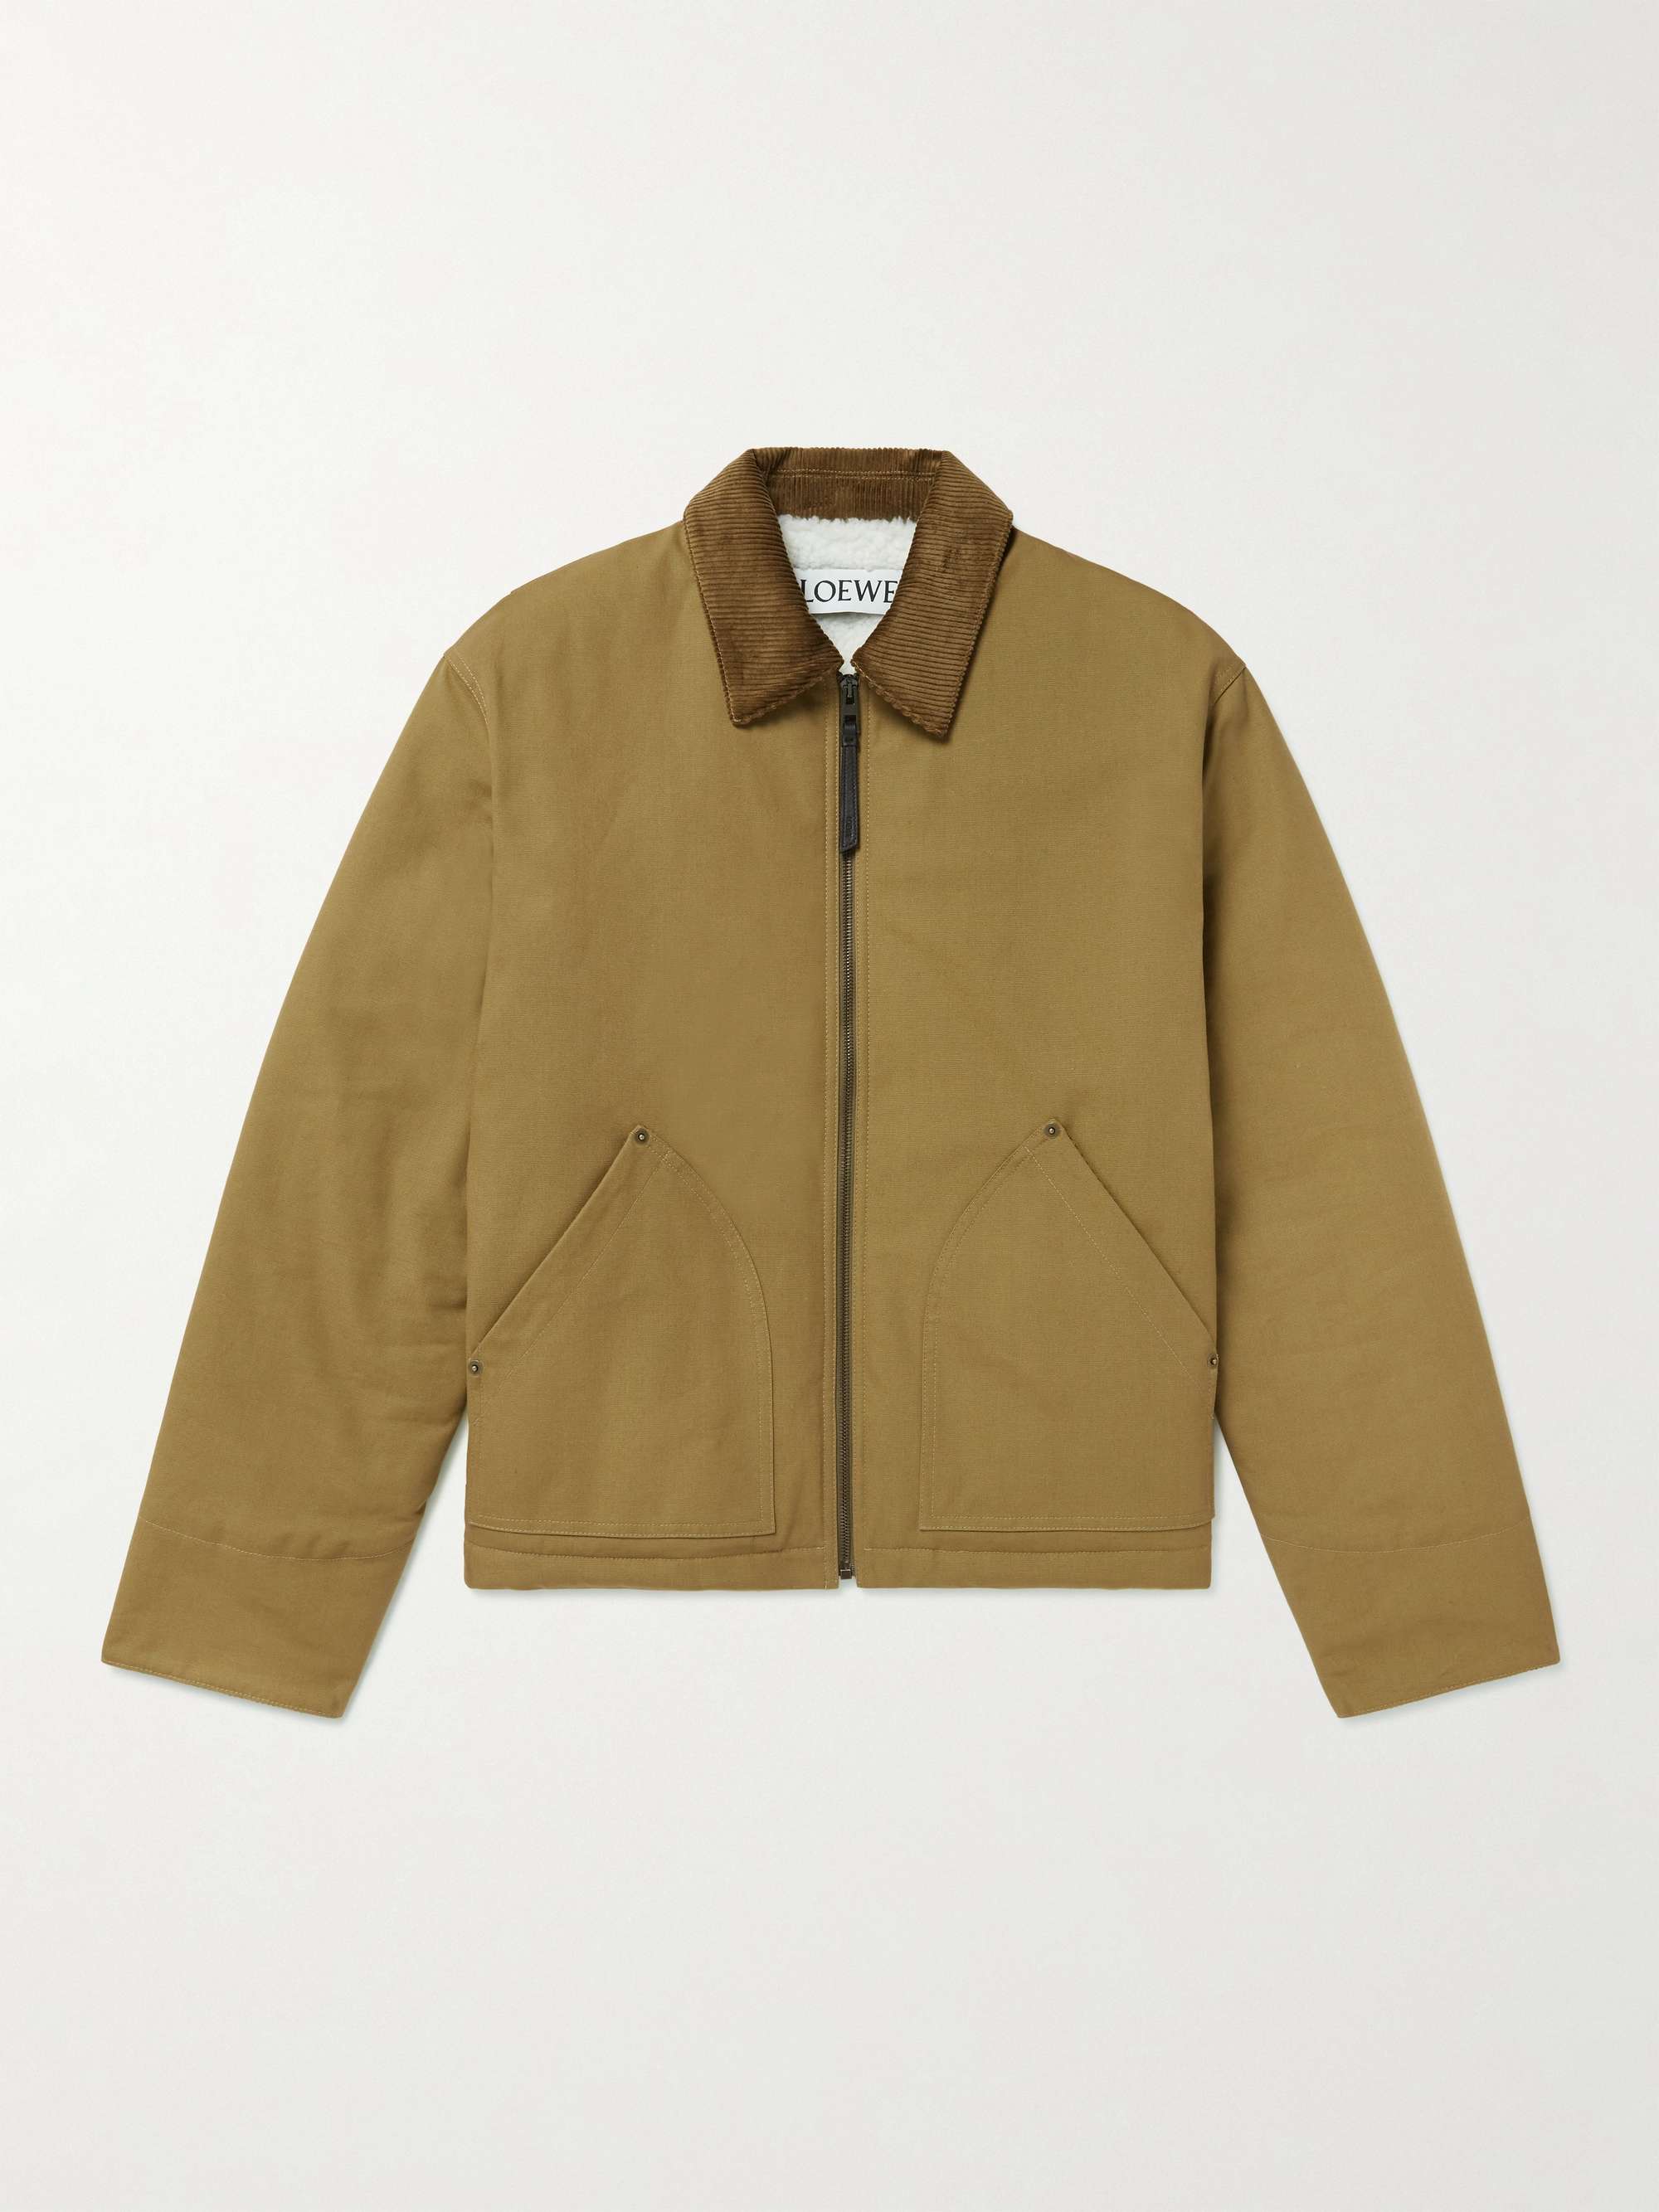 LOEWE Corduroy and Leather-Trimmed Cotton-Canvas Jacket